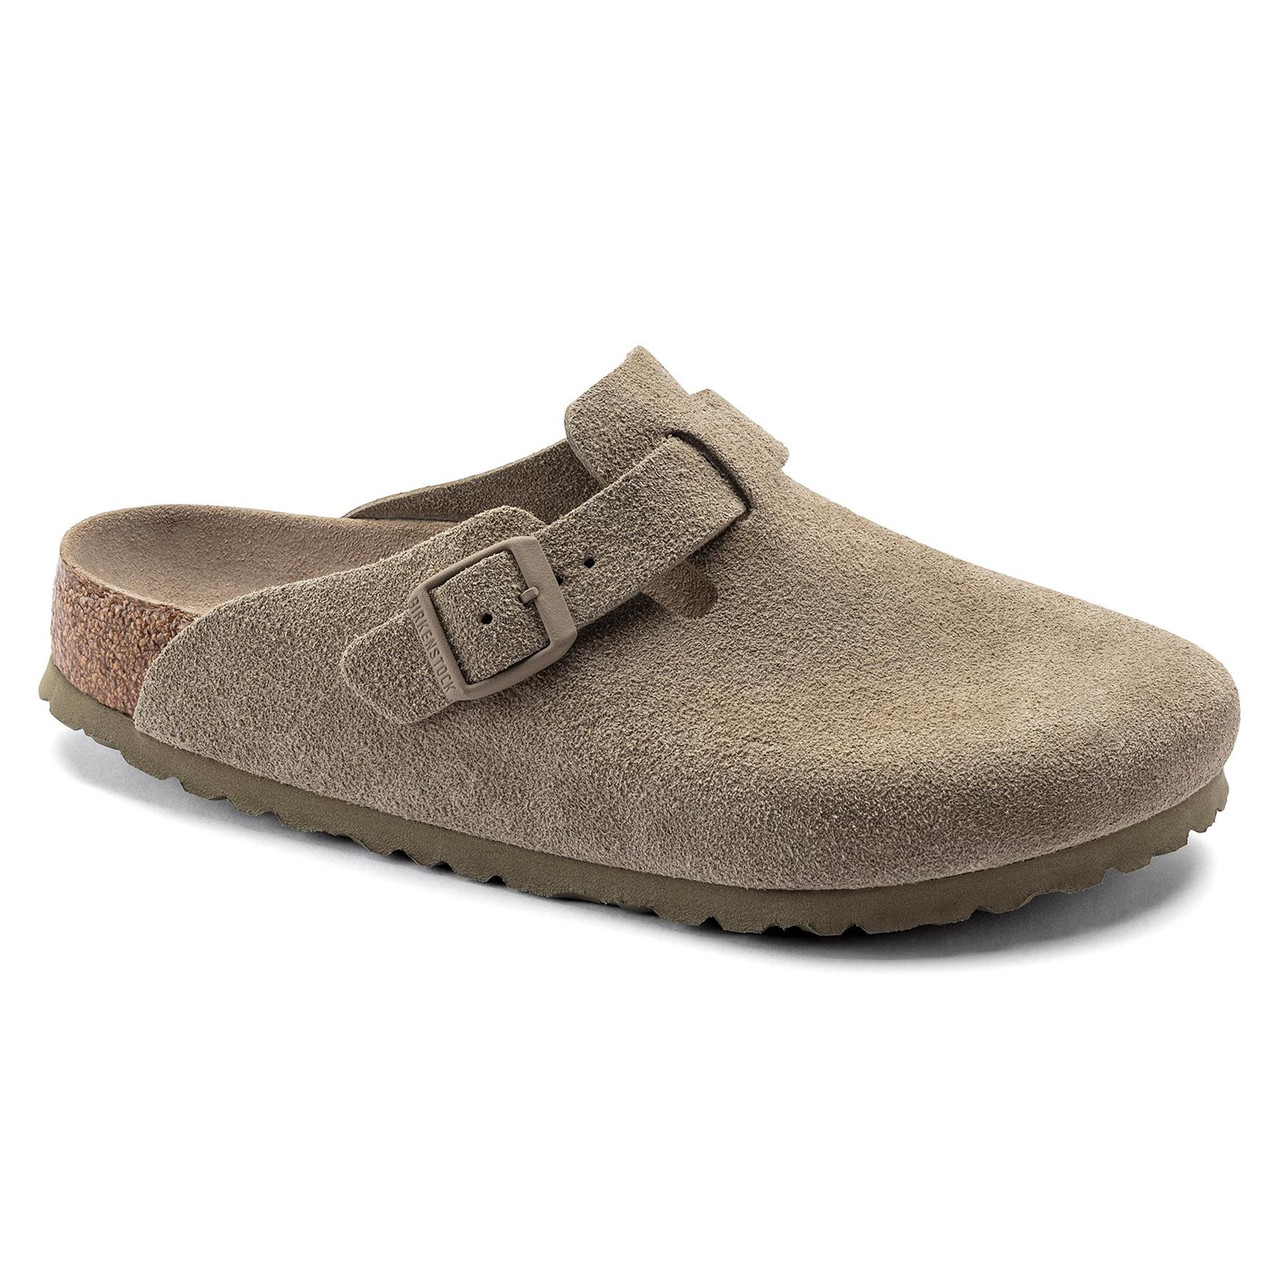 What colors & sizes does the Birkenstock Boston Soft Footbed Suede Leather Clog come in?